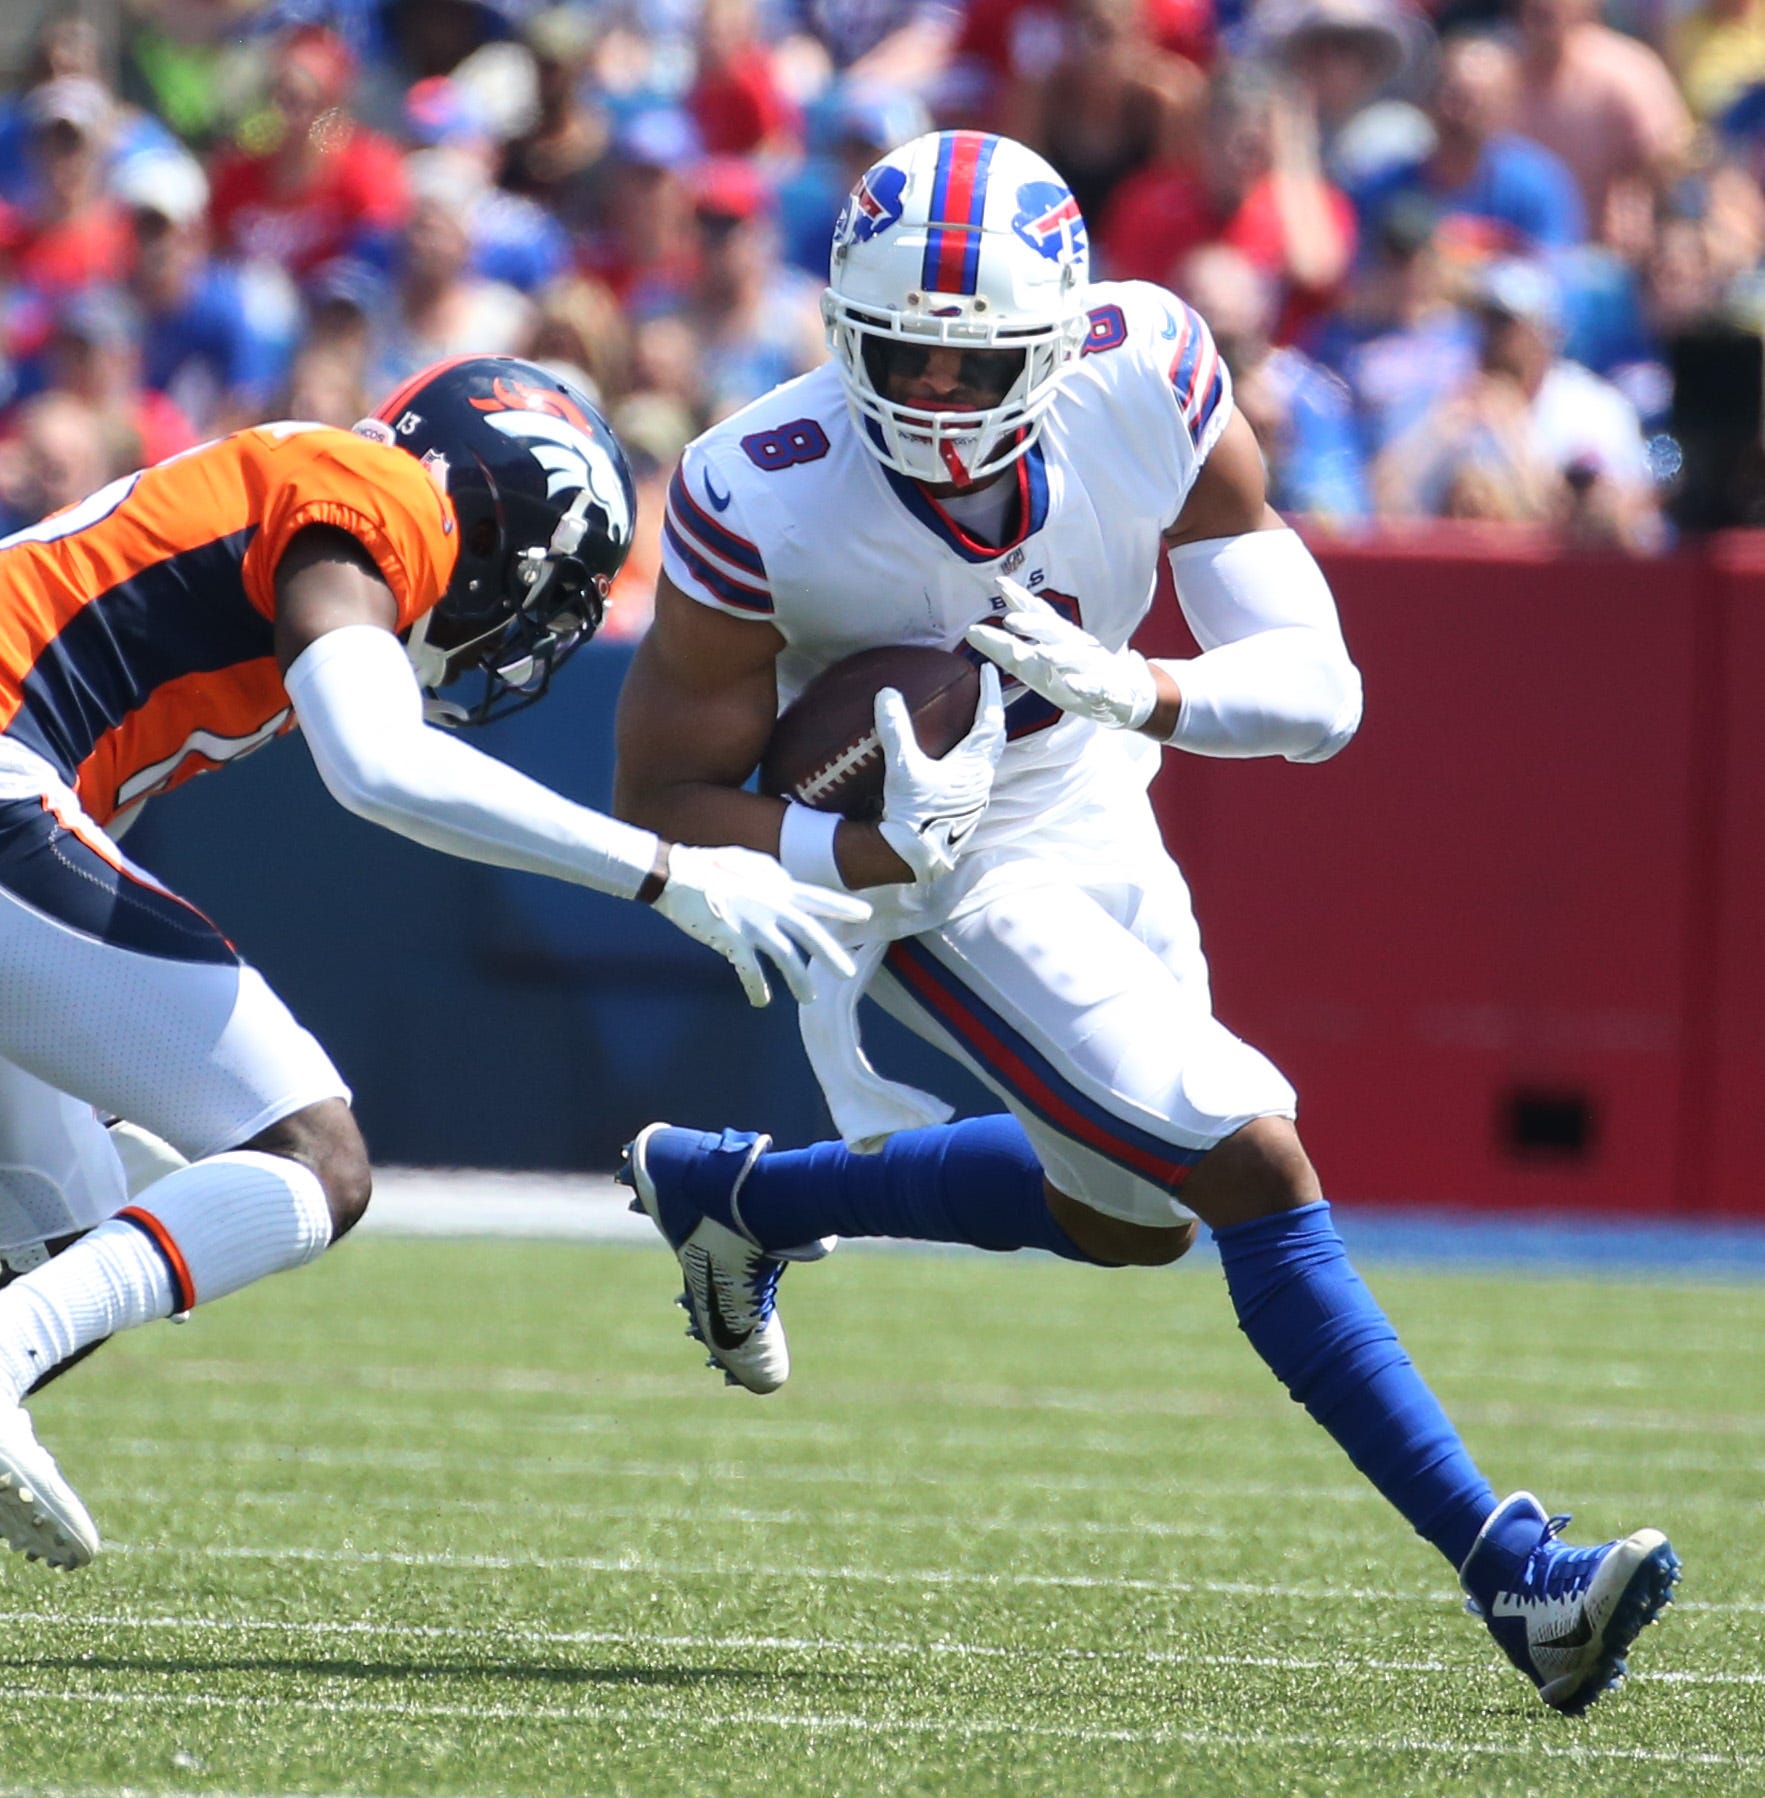 Bills tight end O.J. Howard runs for yards after the catch during the Bills preseason game against Denver Saturday, Aug. 20, 2022 at Highmark Stadium. Buffalo won the game 42-15.